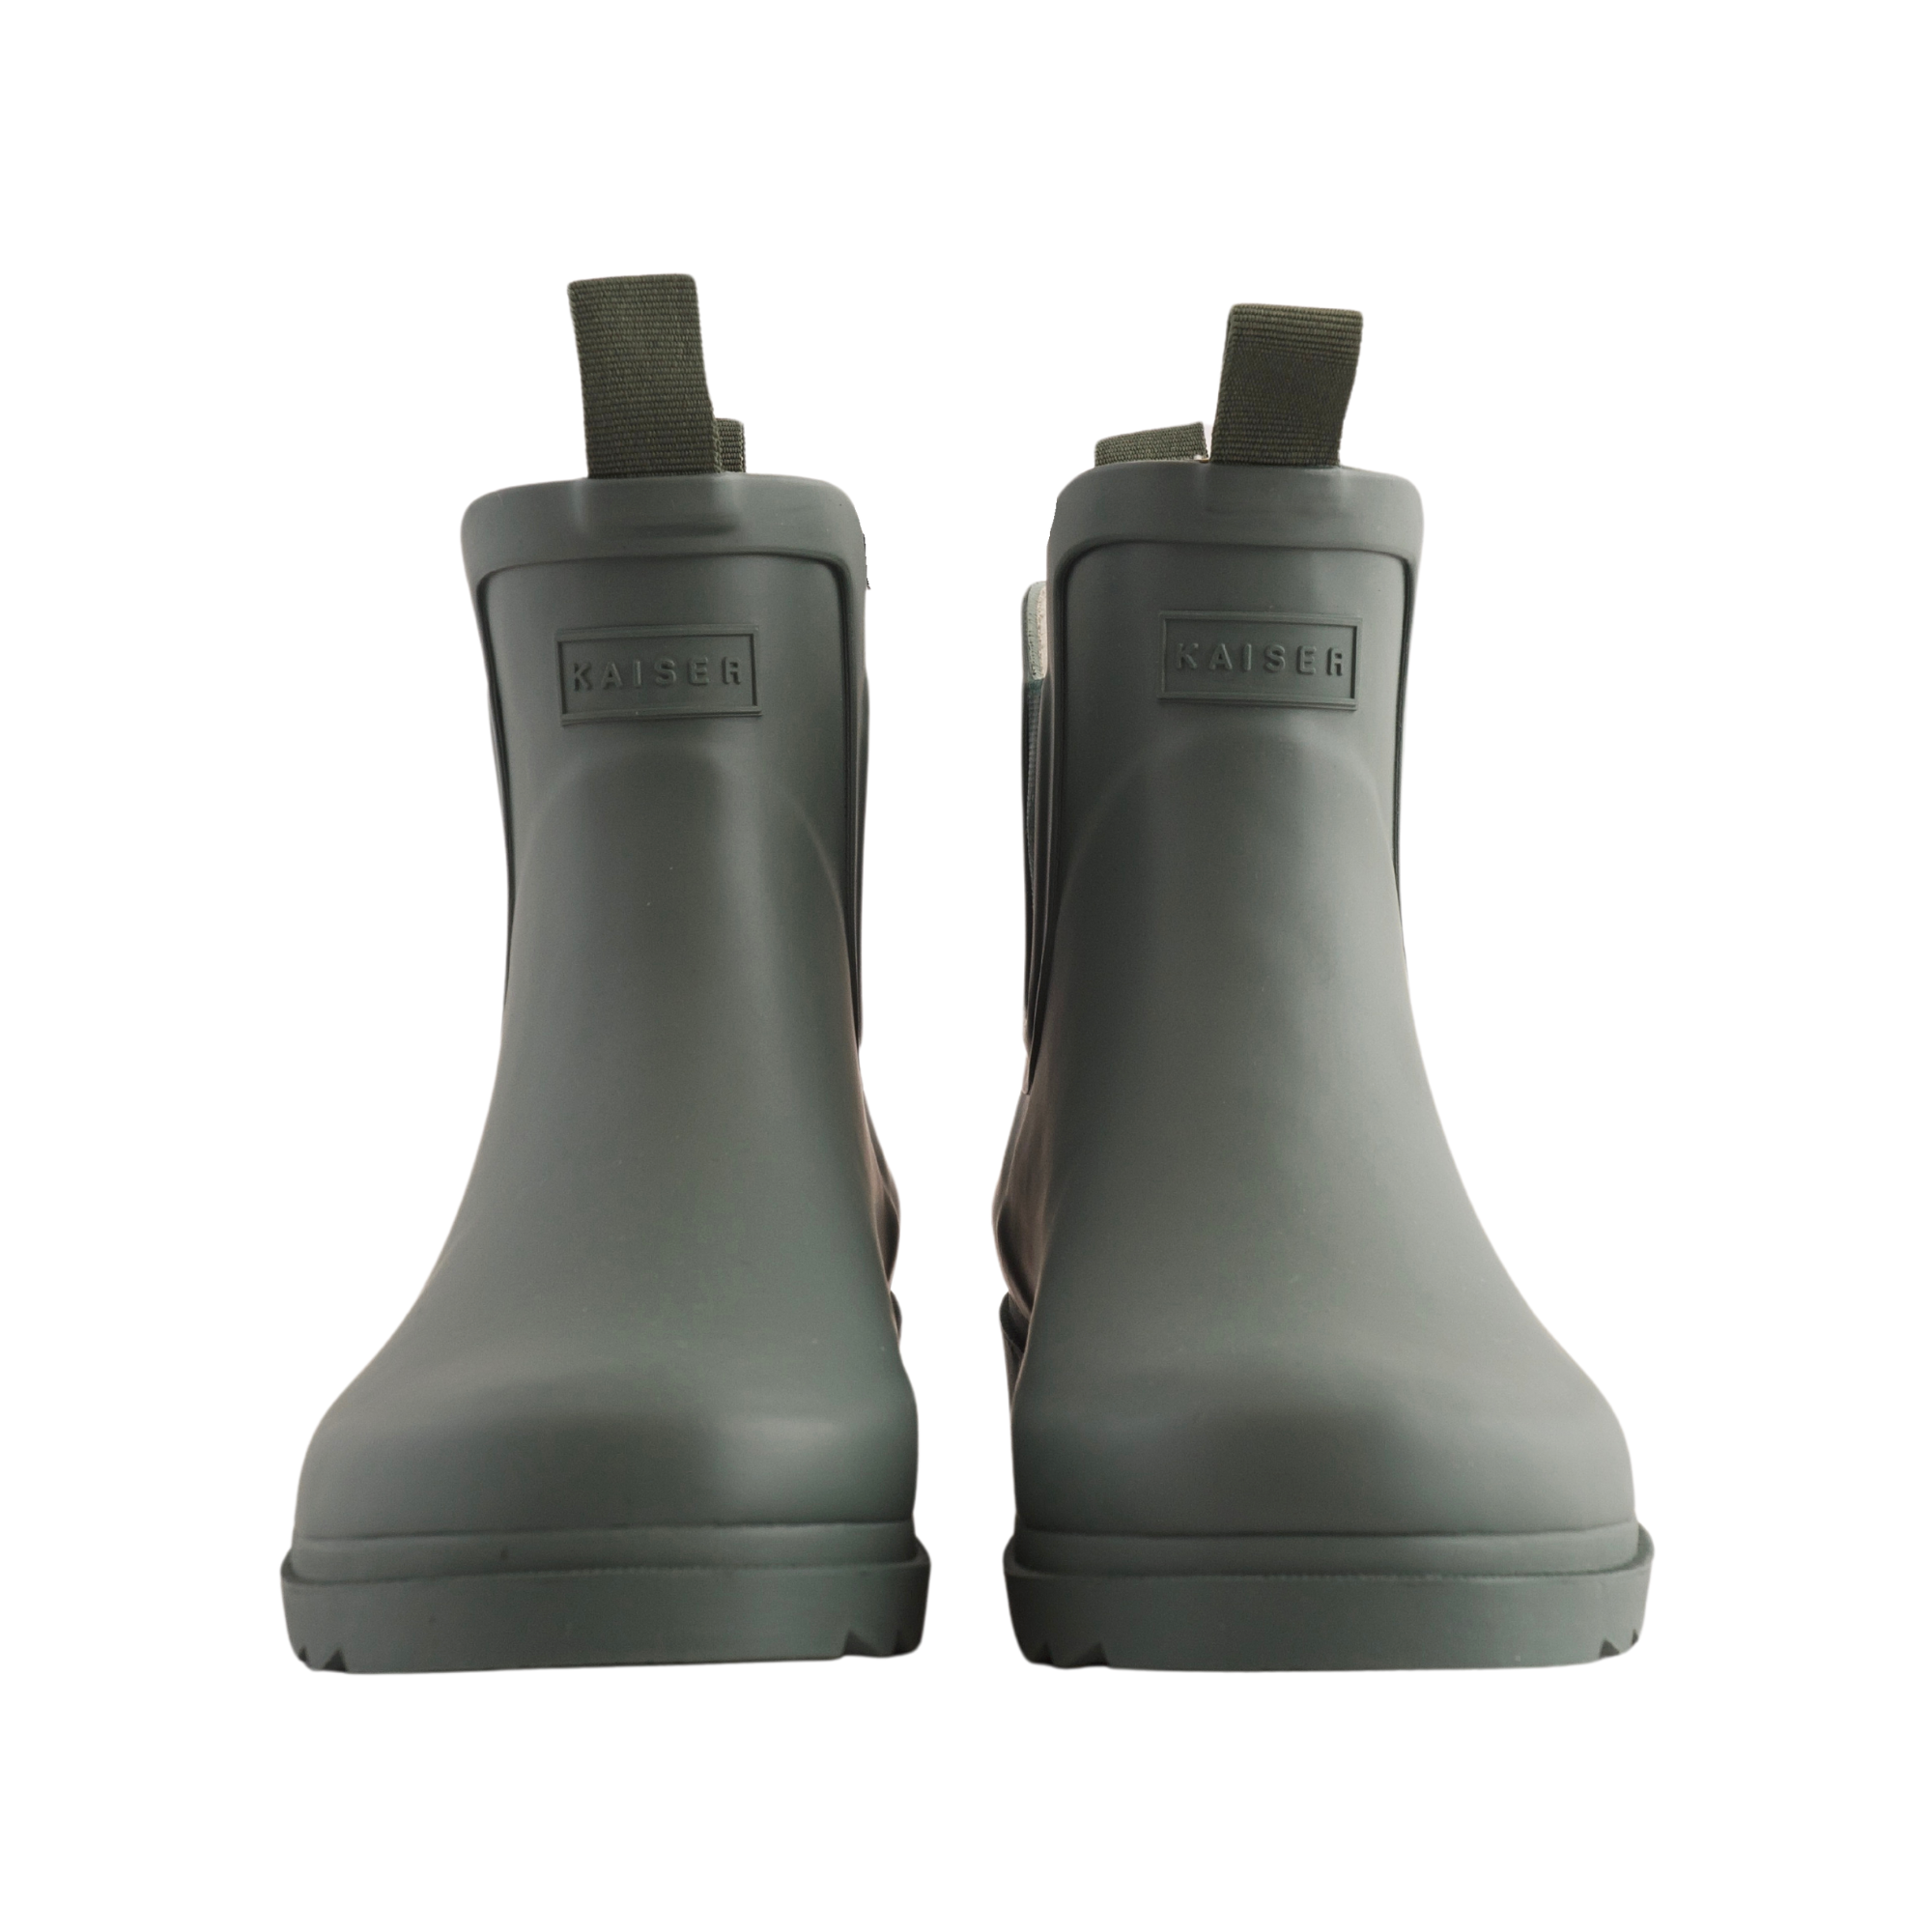 Ankle Gumboots - Green Size 9